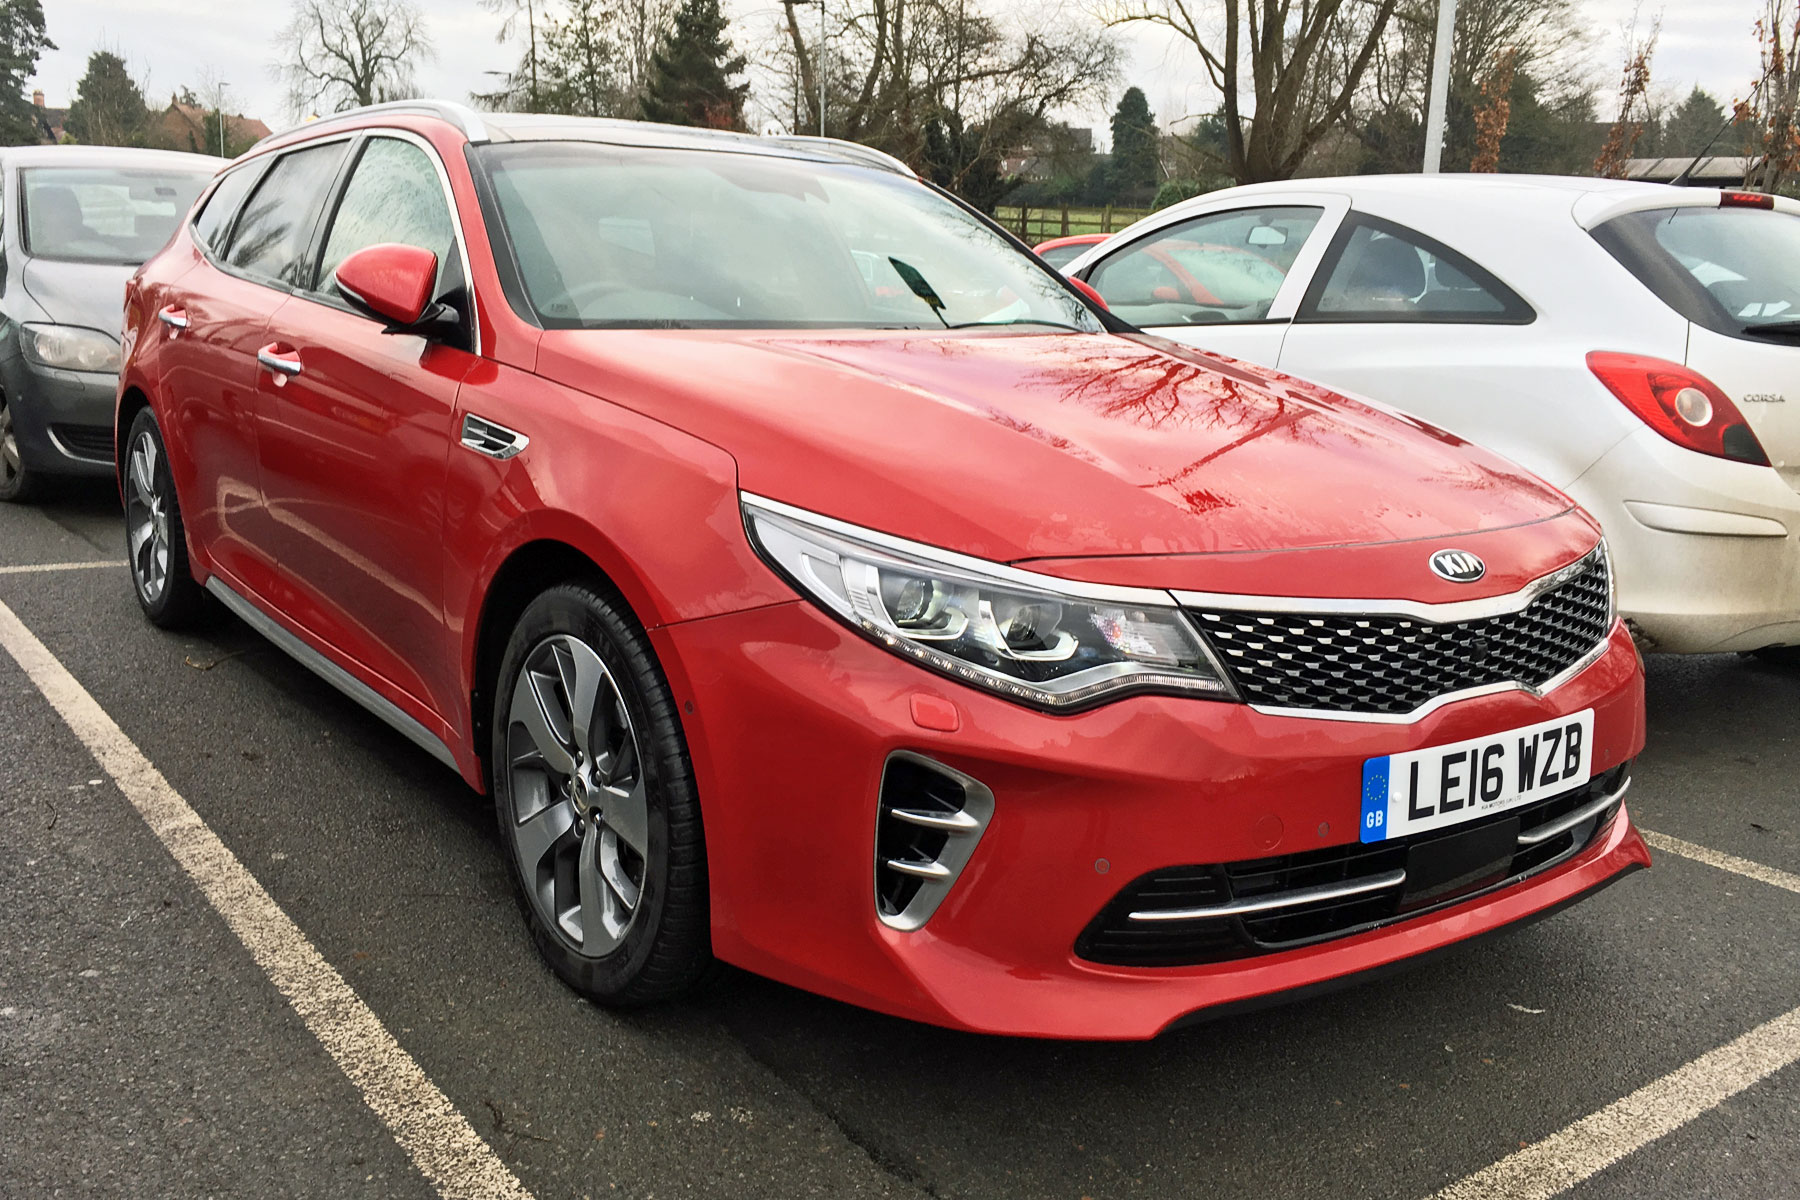 Good things about life with the Kia Optima SW